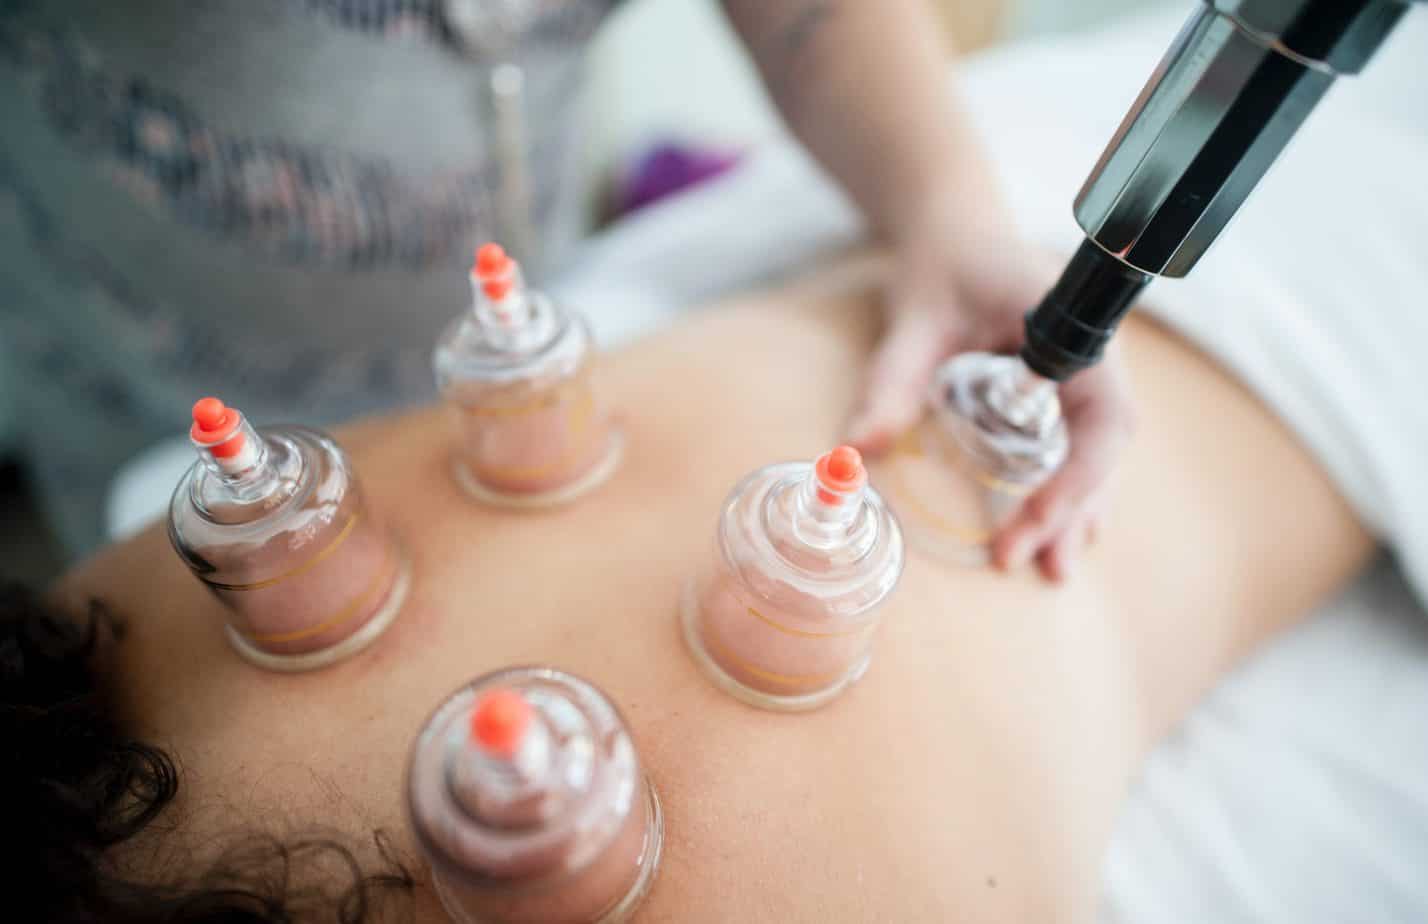 Cupping: What exactly is it?